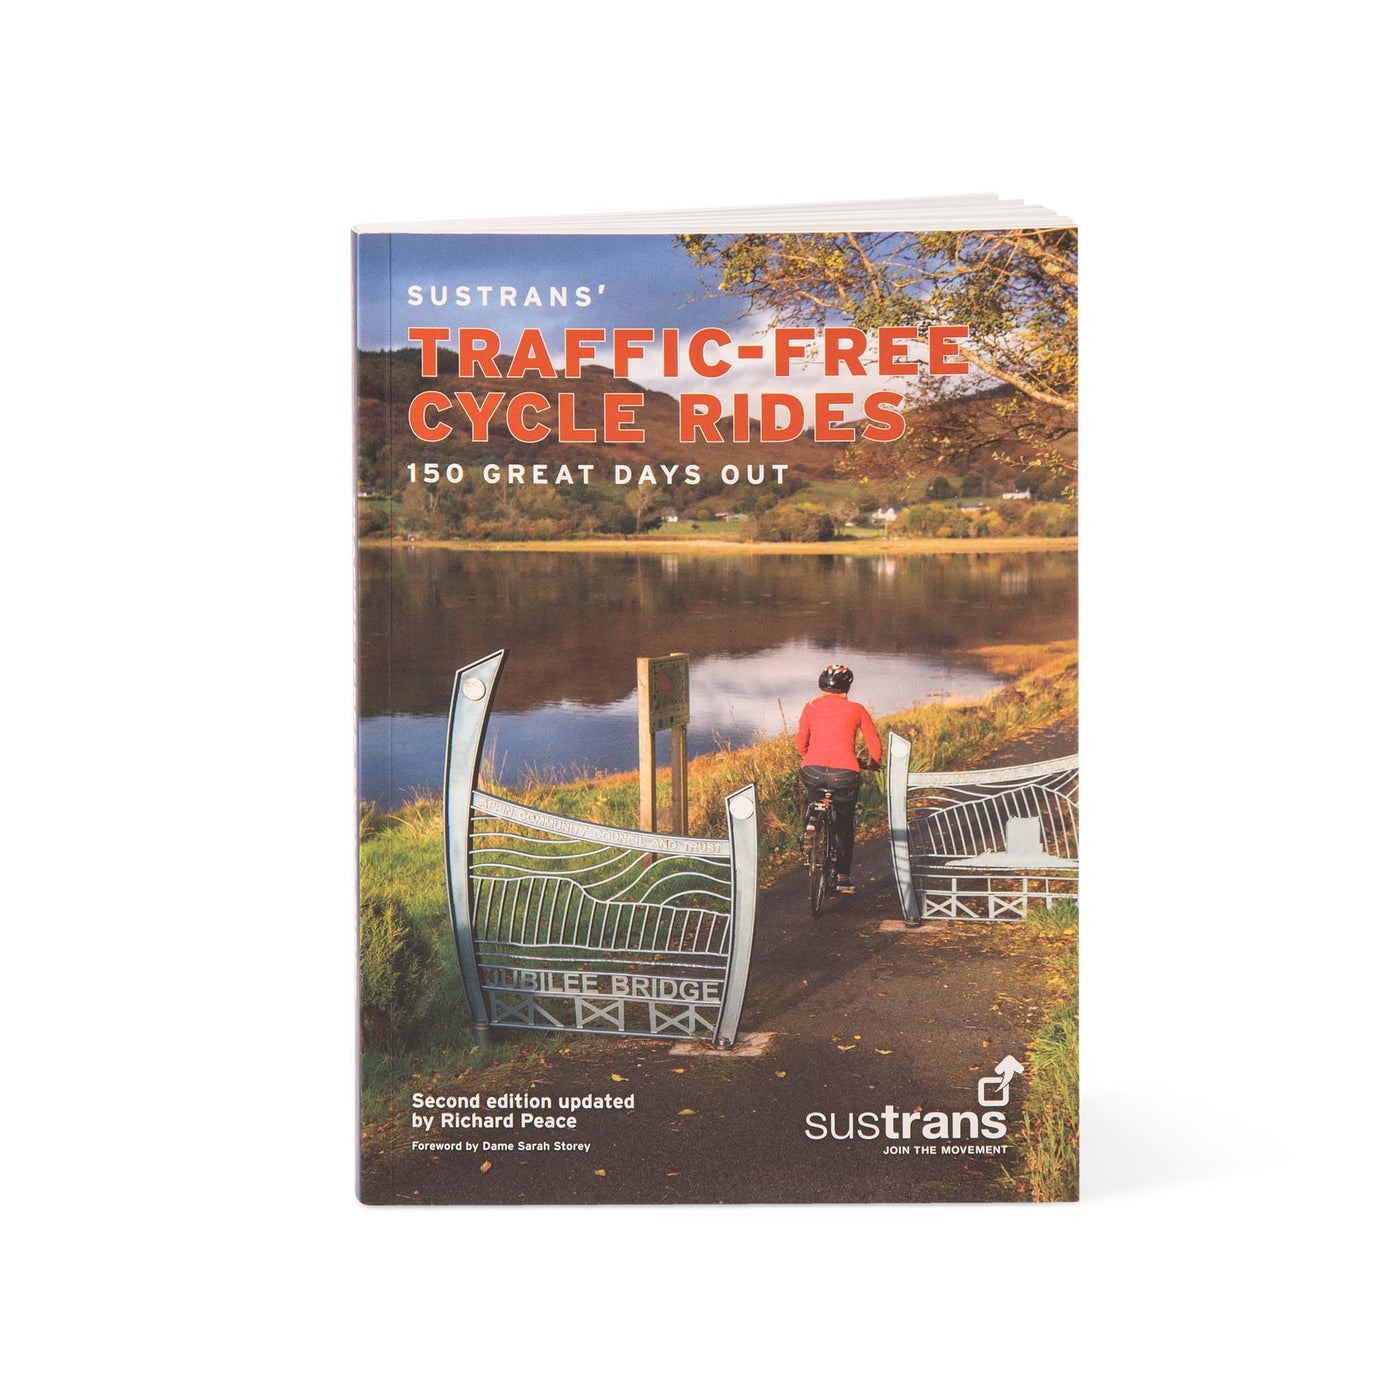 Traffic-Free Cycle Rides guidebook by Sustrans - second edition